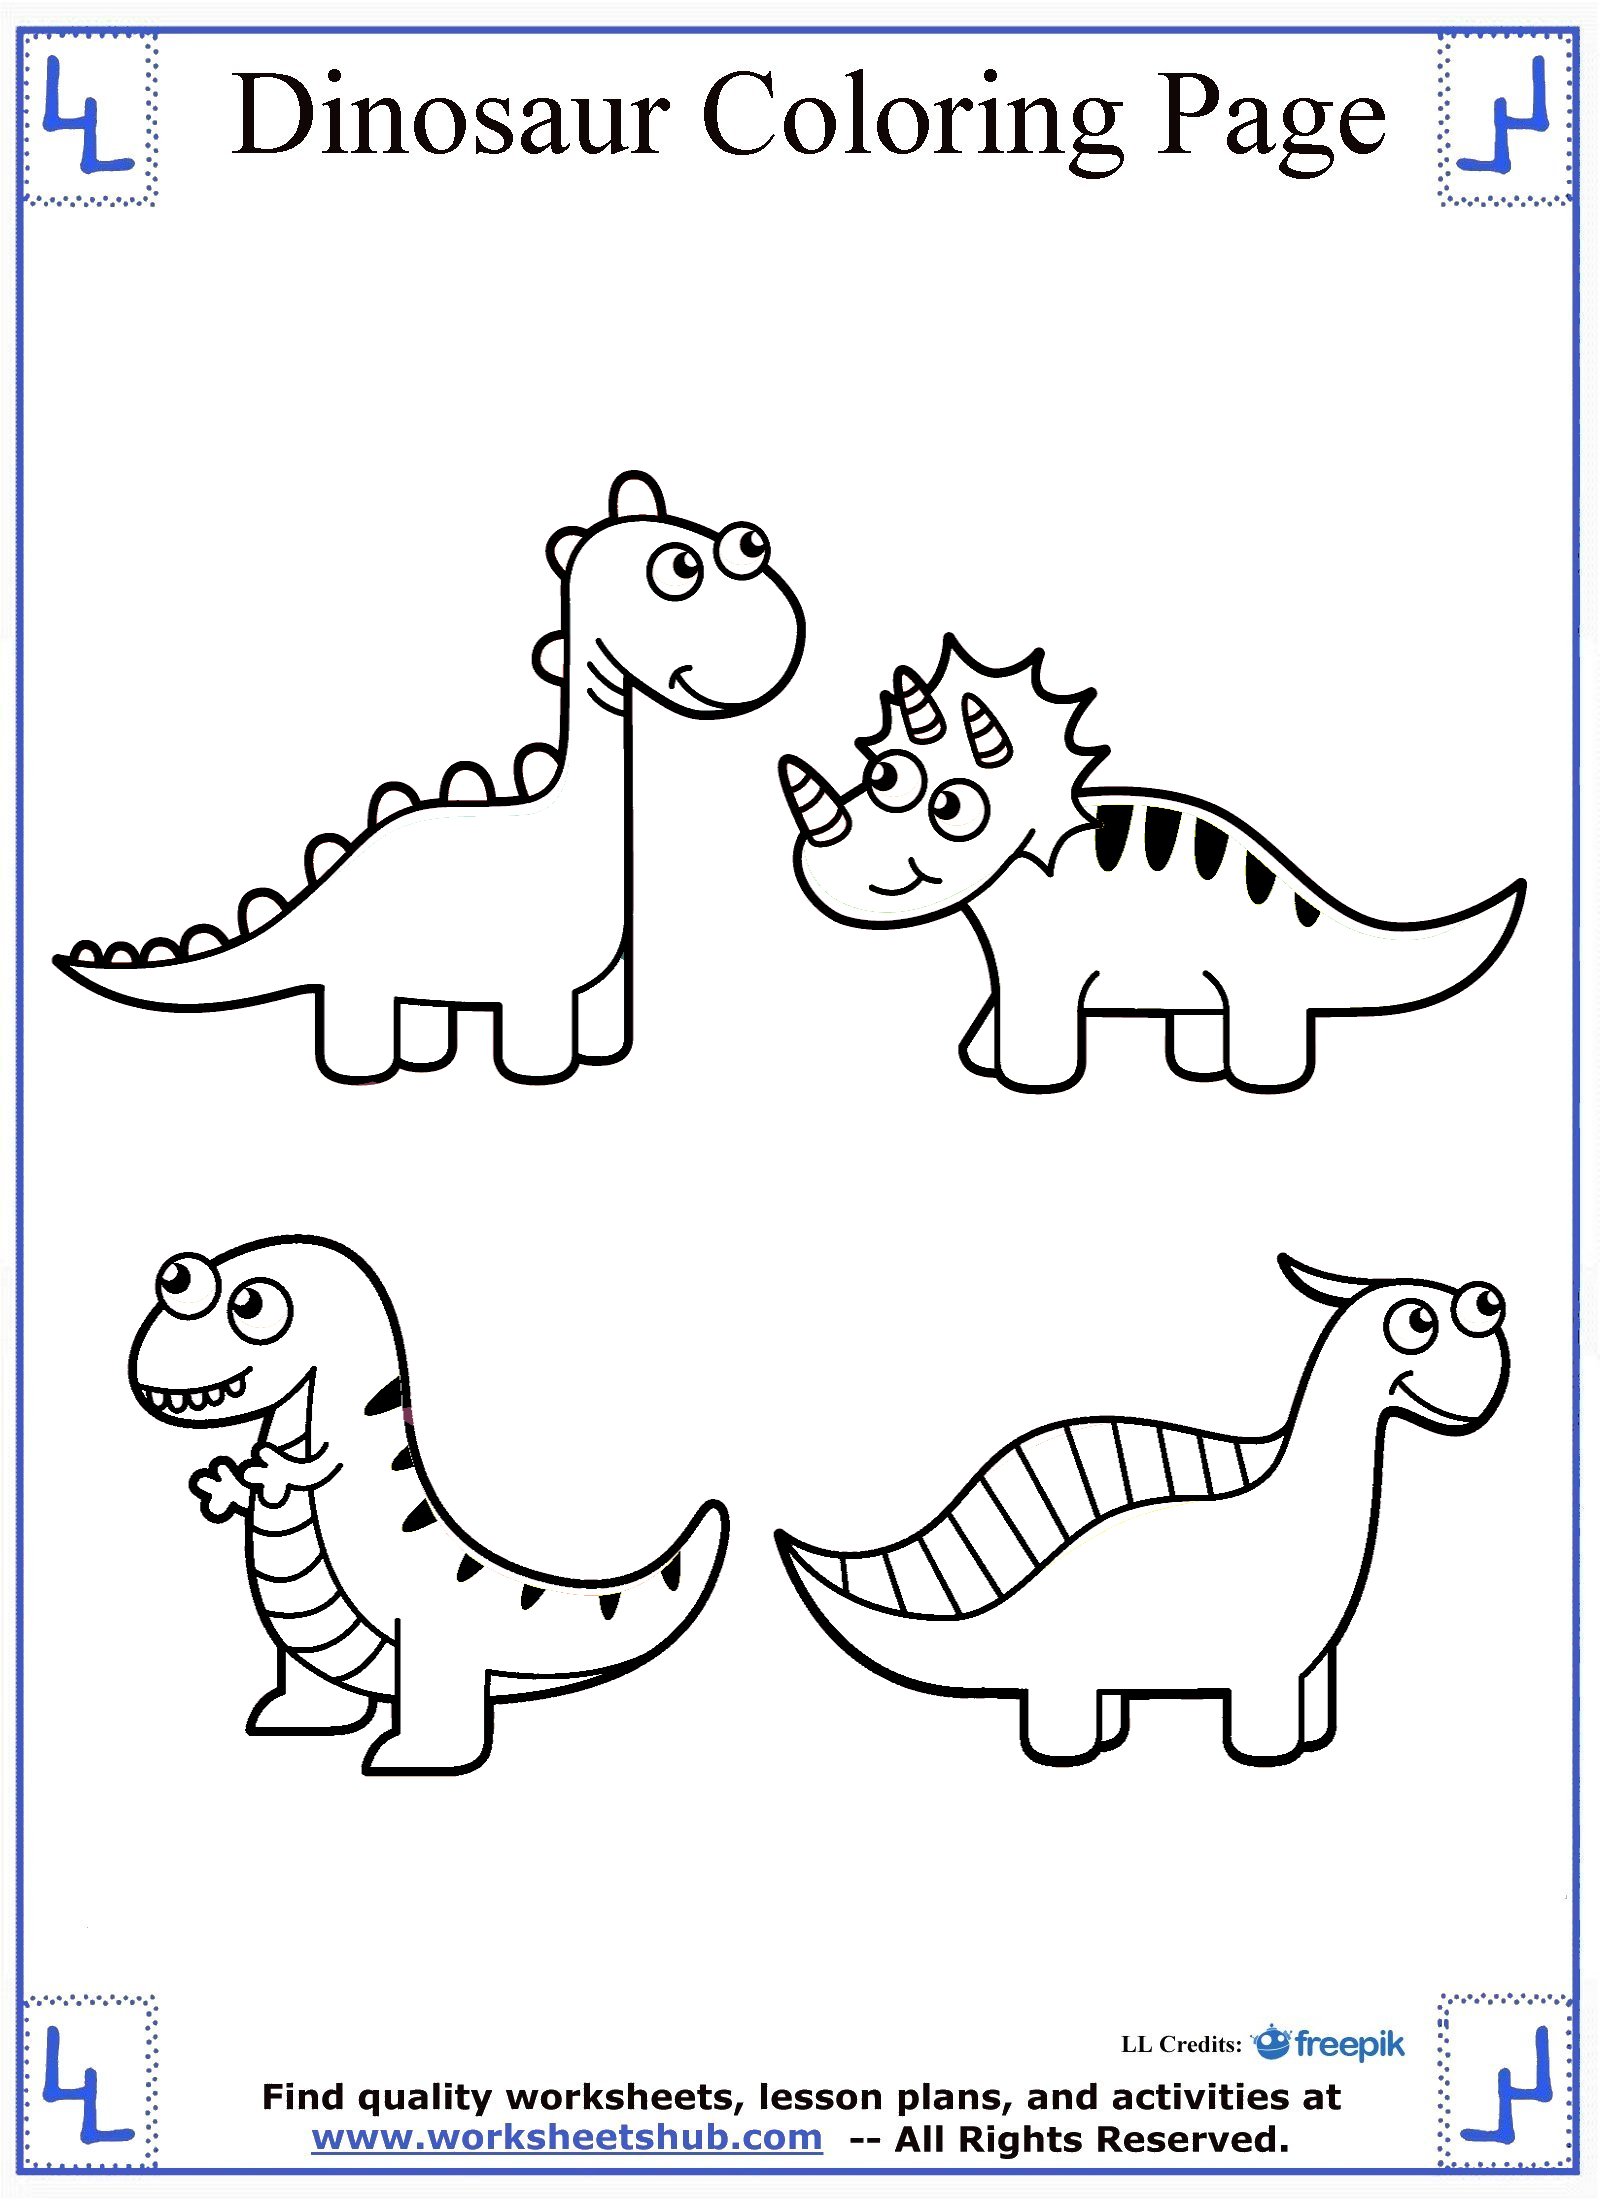 Download Dinosaur Coloring Pages